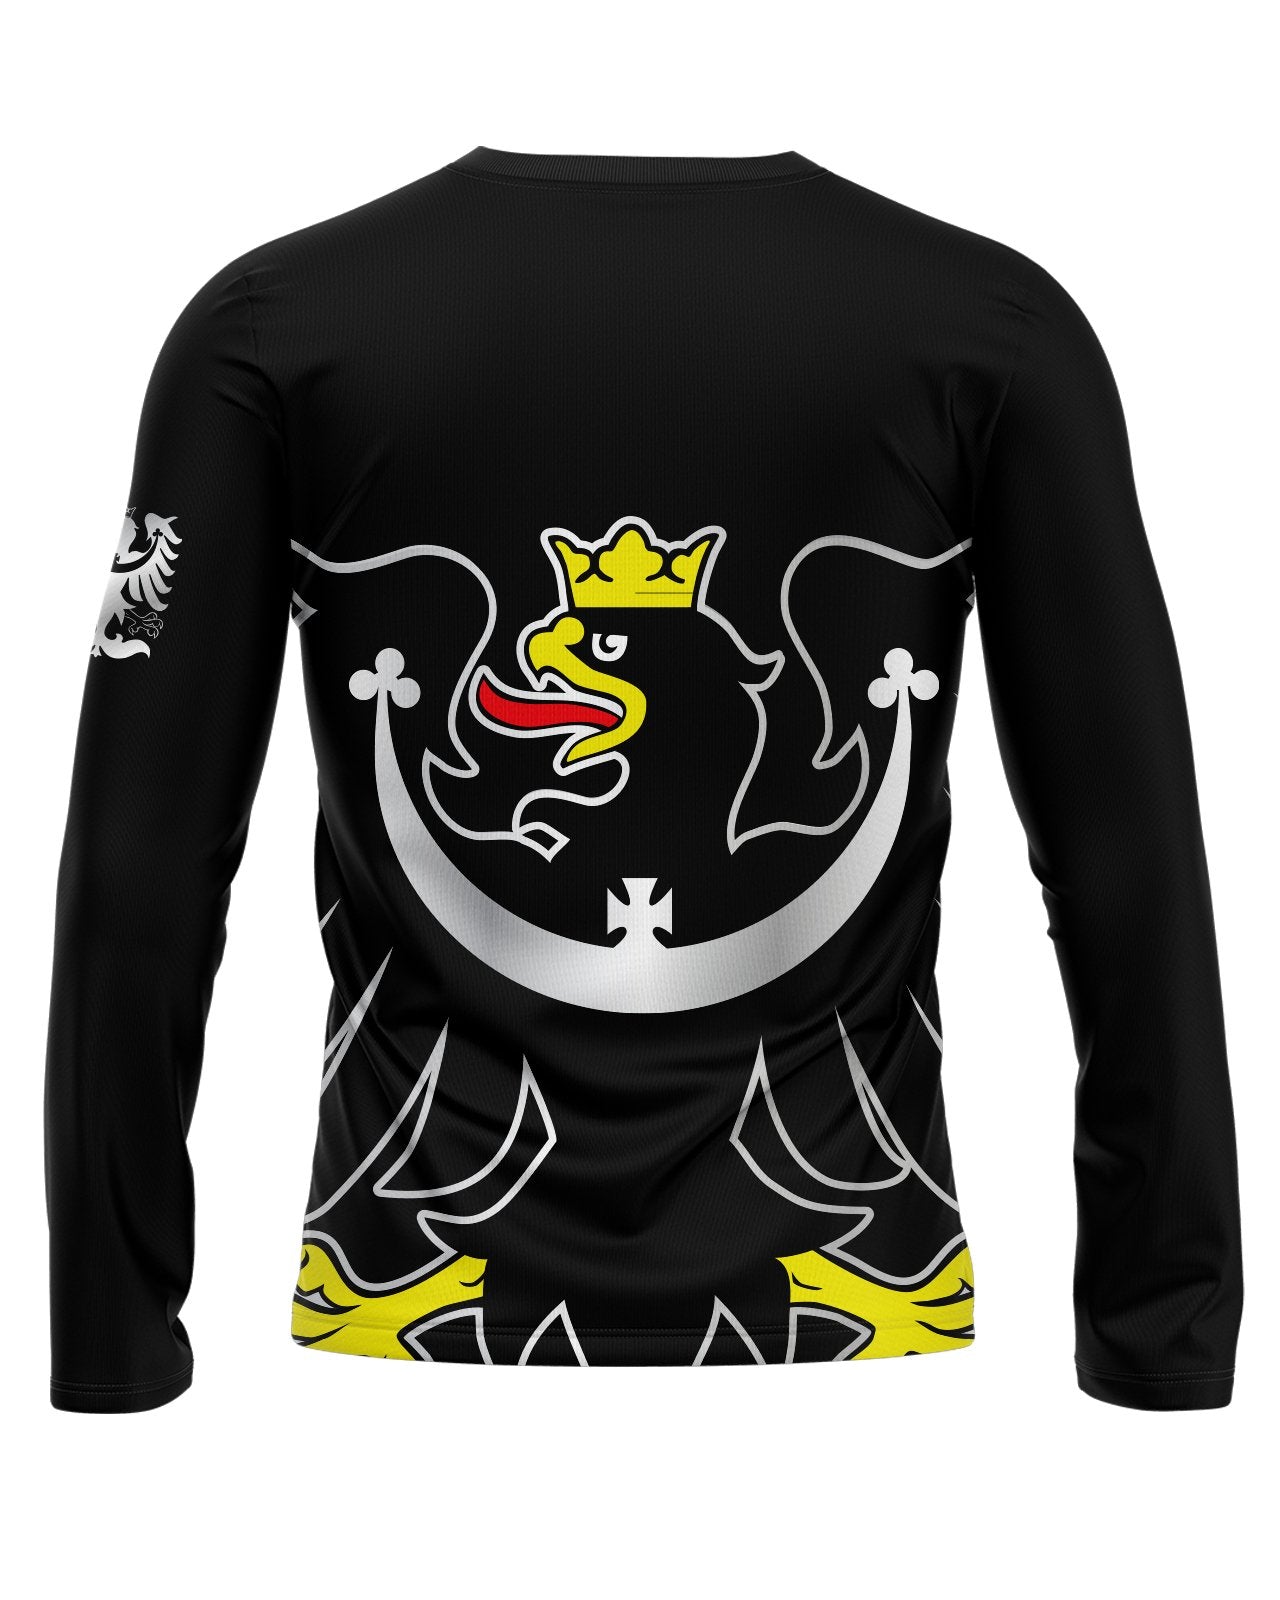 King Long-Sleeve T-shirt   Patriot Sports    Back View. Multicolored.